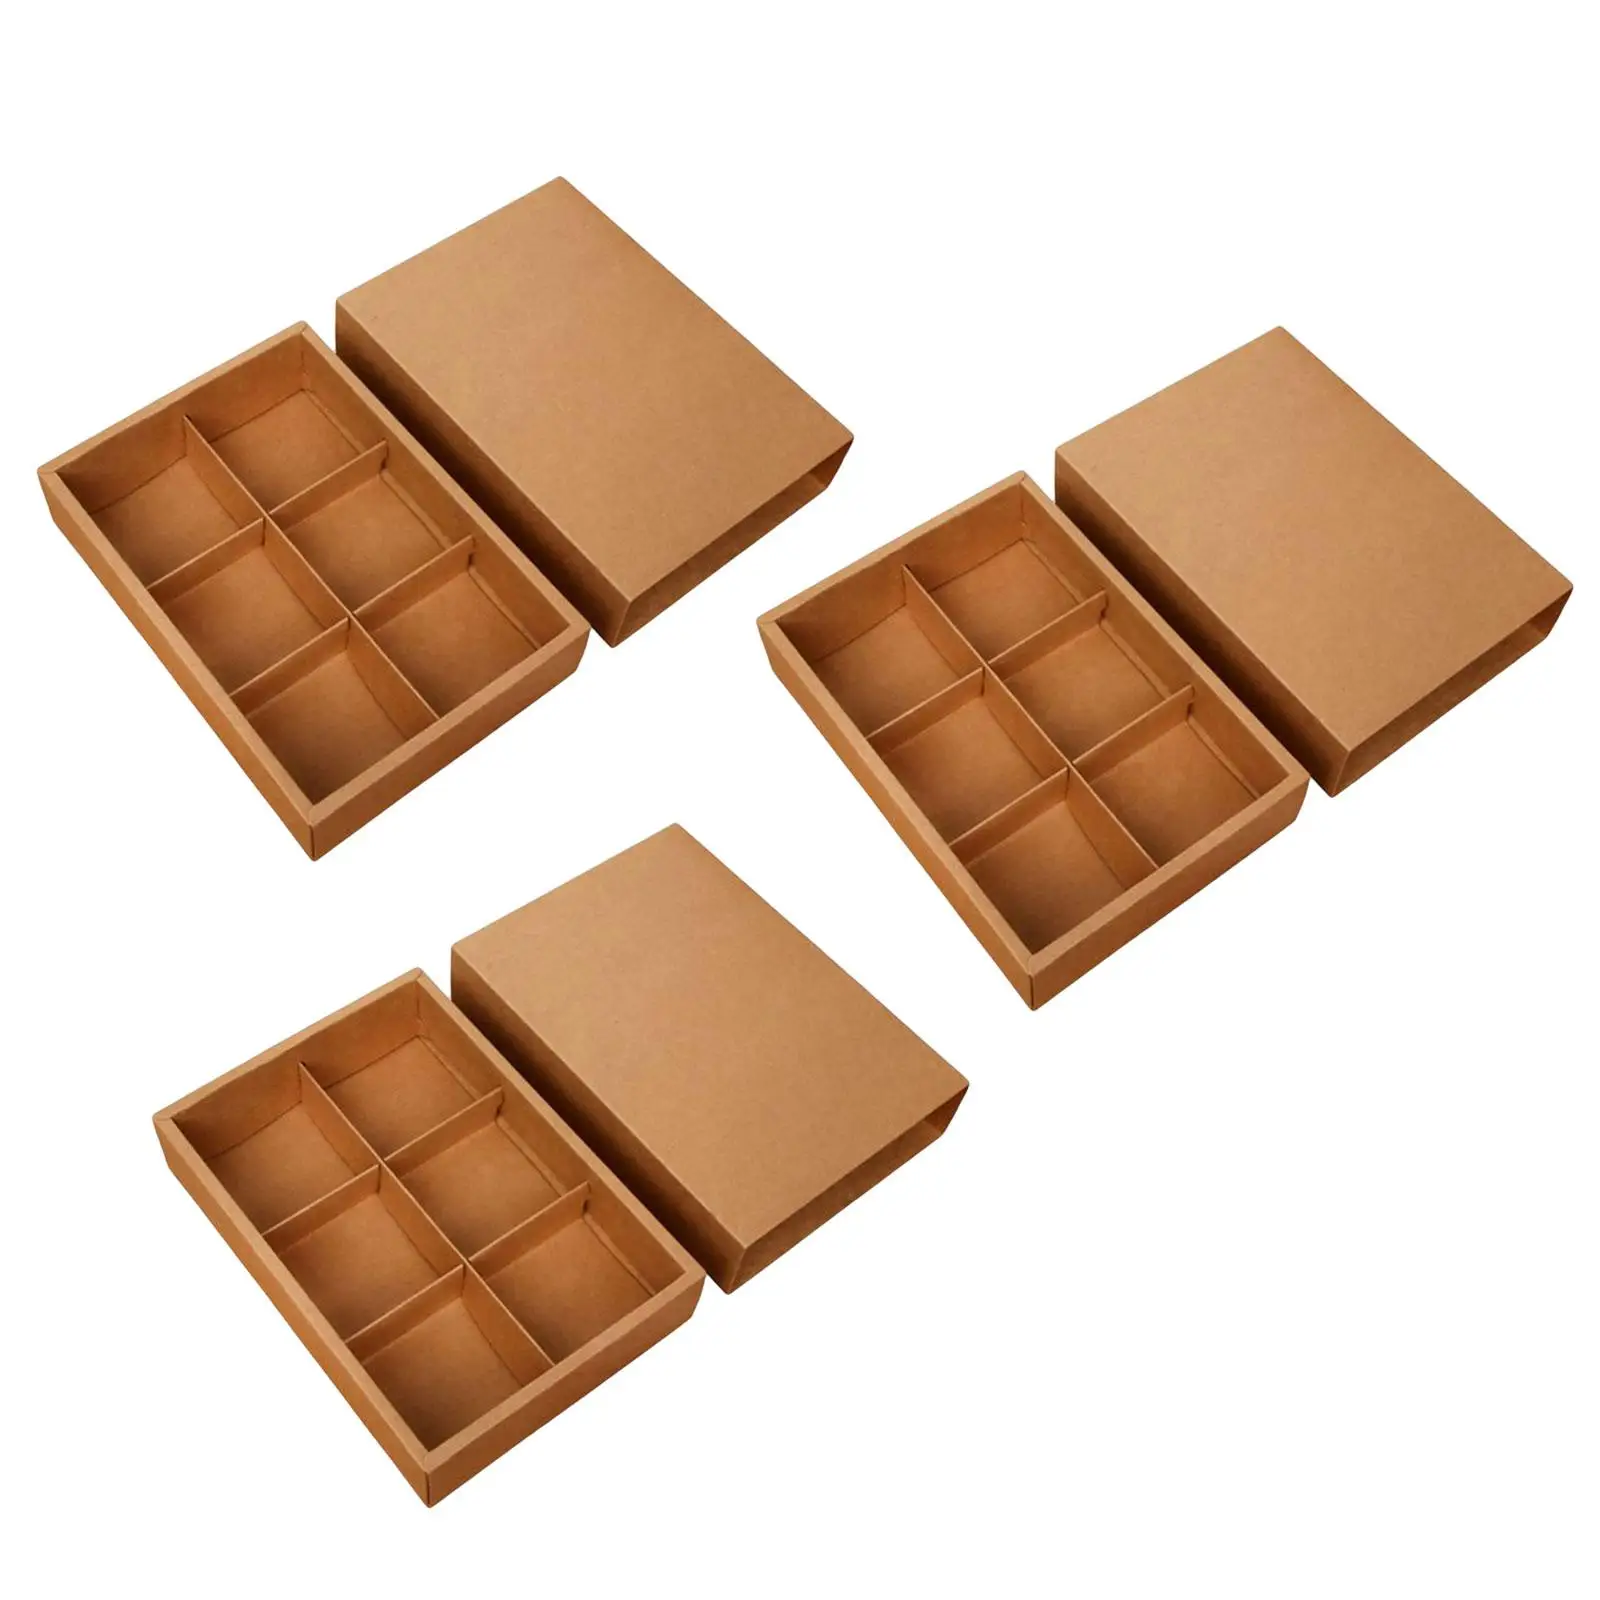 3x Craft Paper Box Dividers Bakery Gift Packaging Six Cavity Mooncake Cookie Packaging for Candy Business Party Favor Decoration